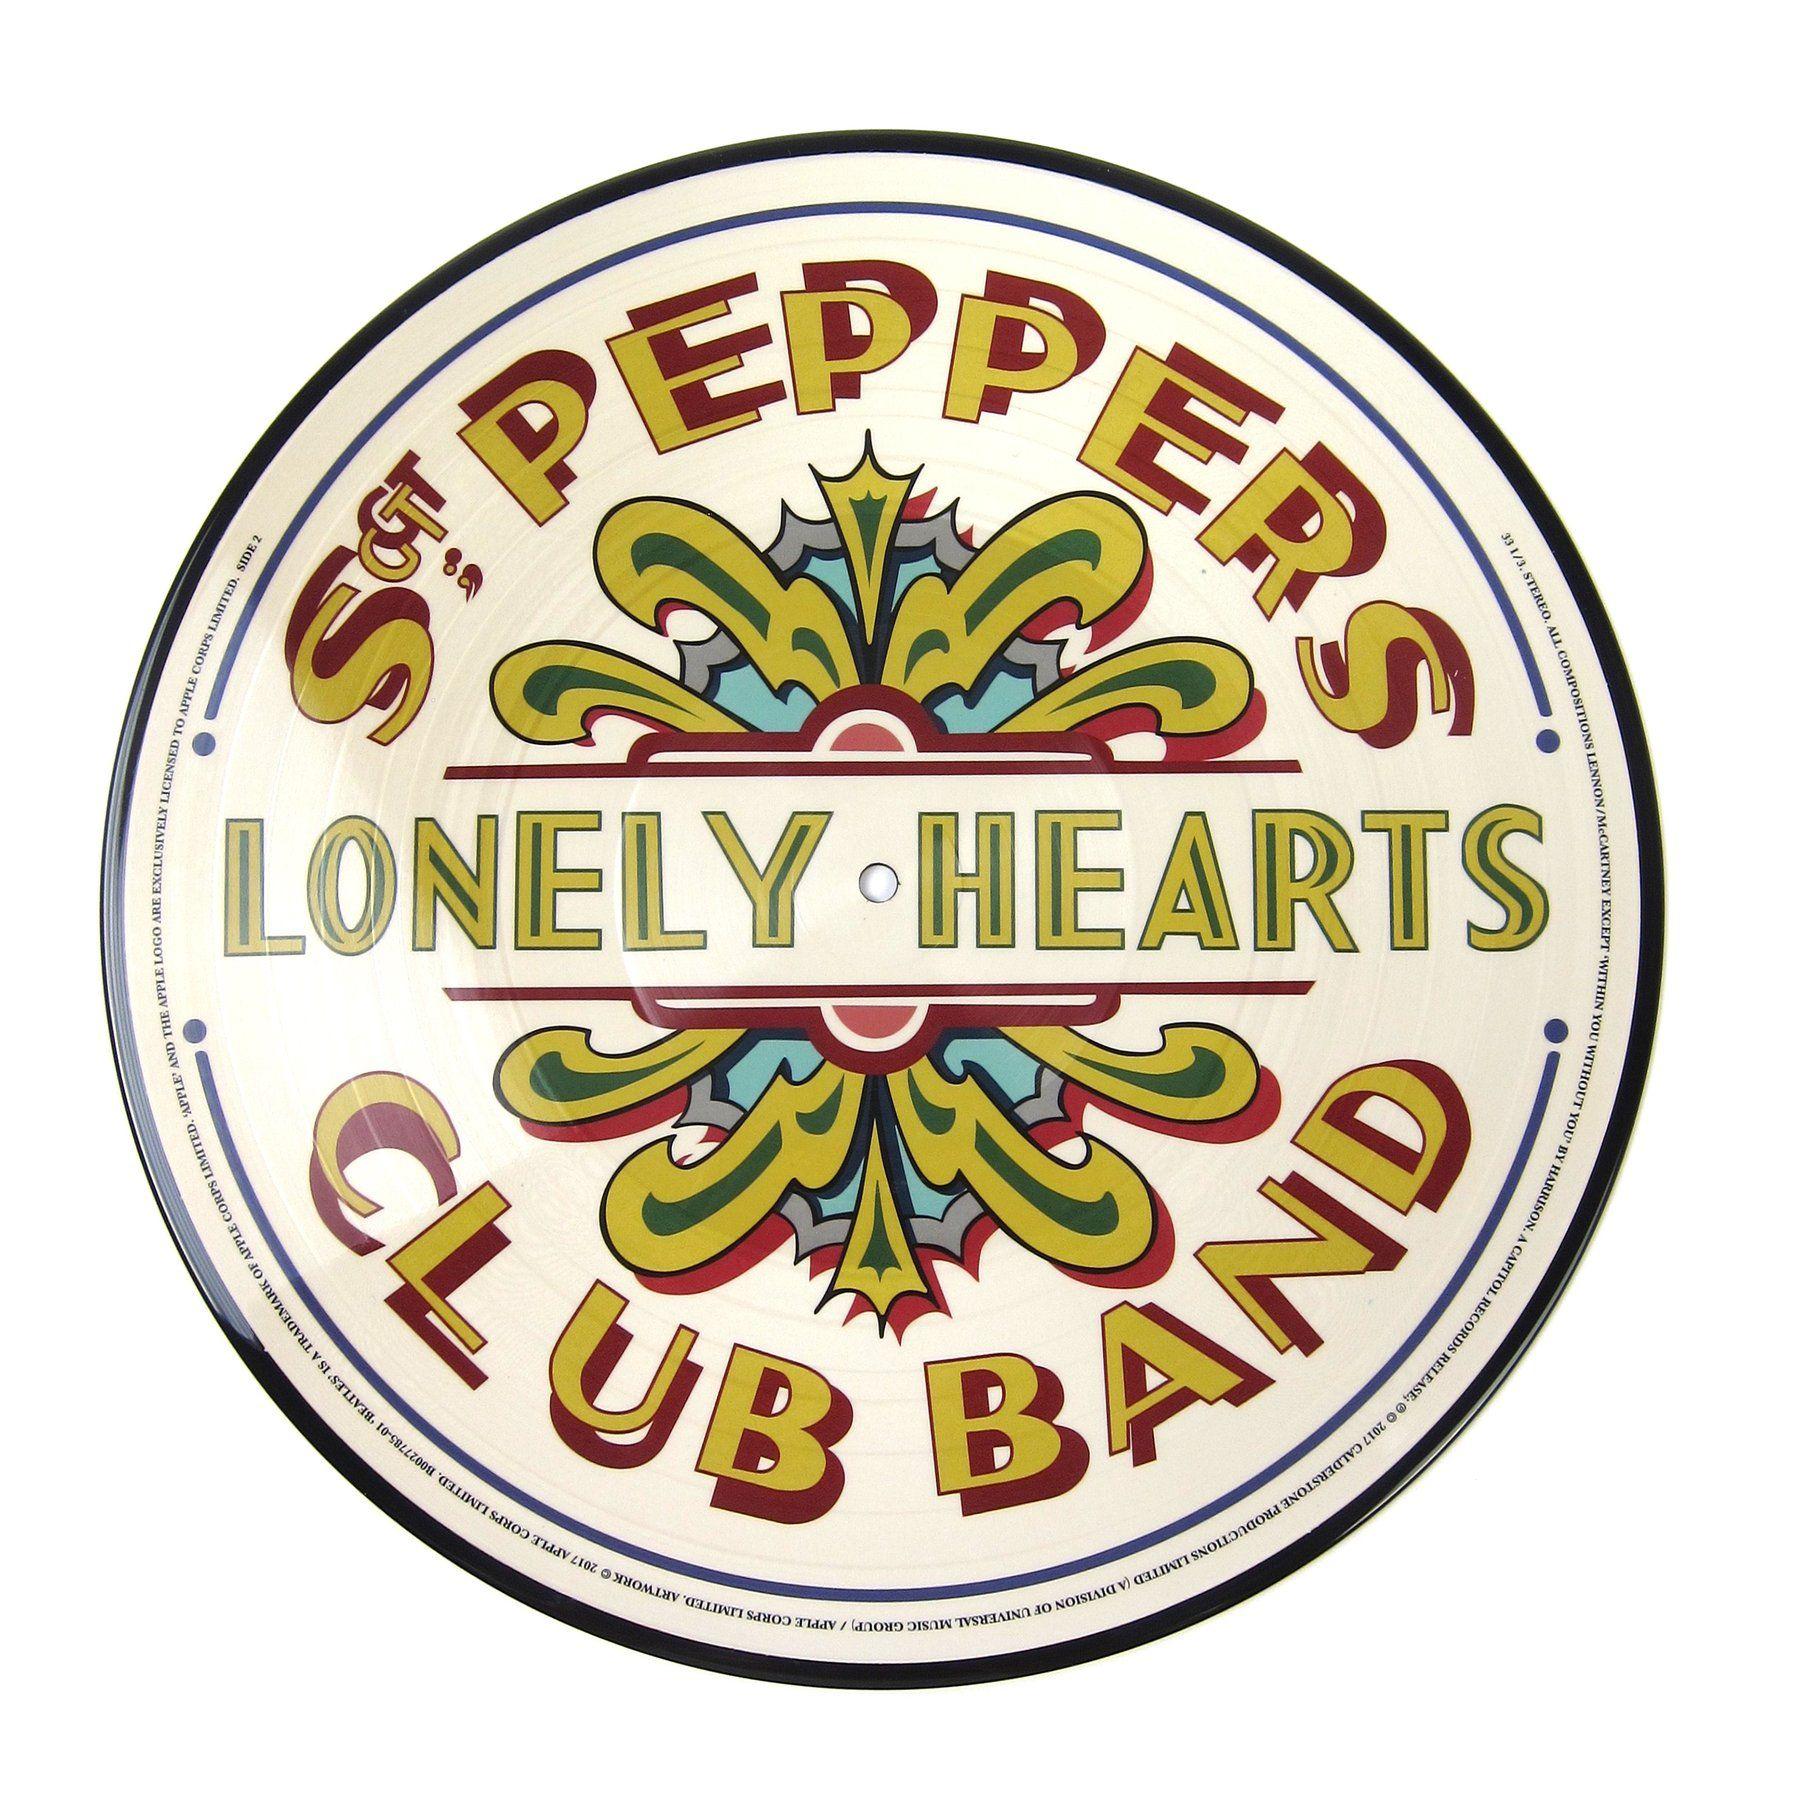 The Beatles Sgt. Pepper Logo - The Beatles: Sgt. Pepper's Lonely Hearts Club Band Pic Disc, Giles